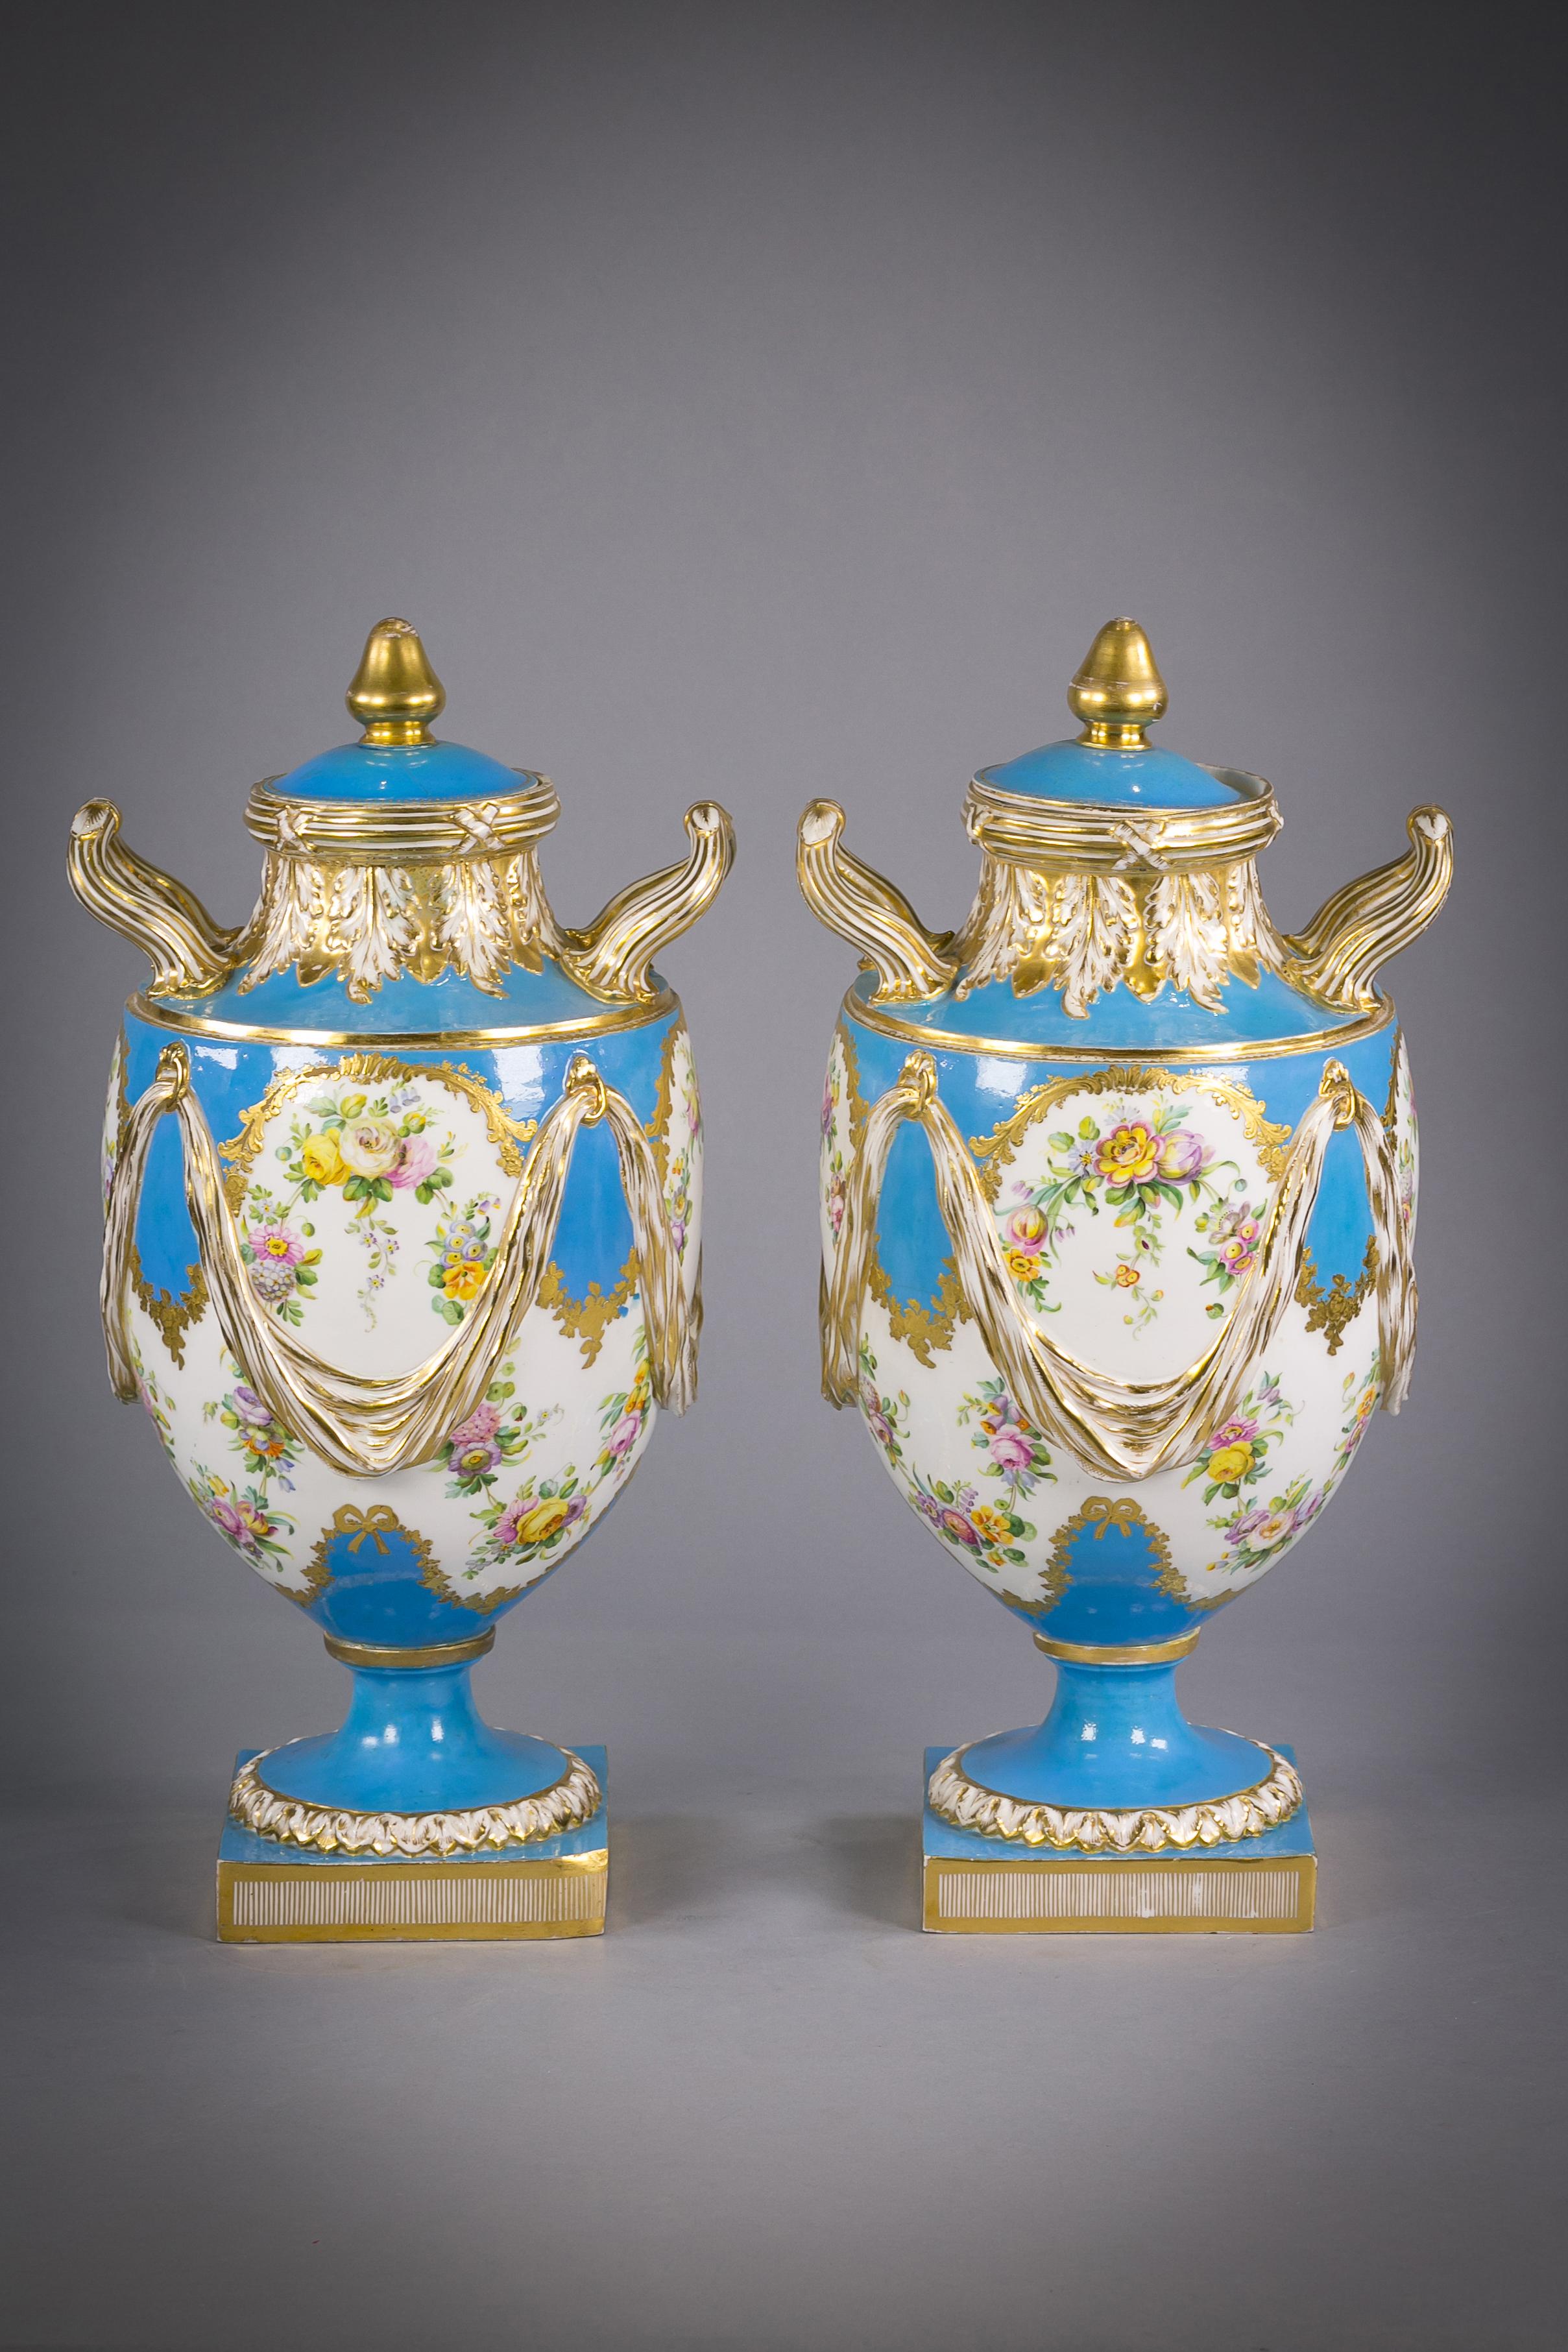 Pair of English porcelain two handled covered vases, Sèvres style, circa 1850.